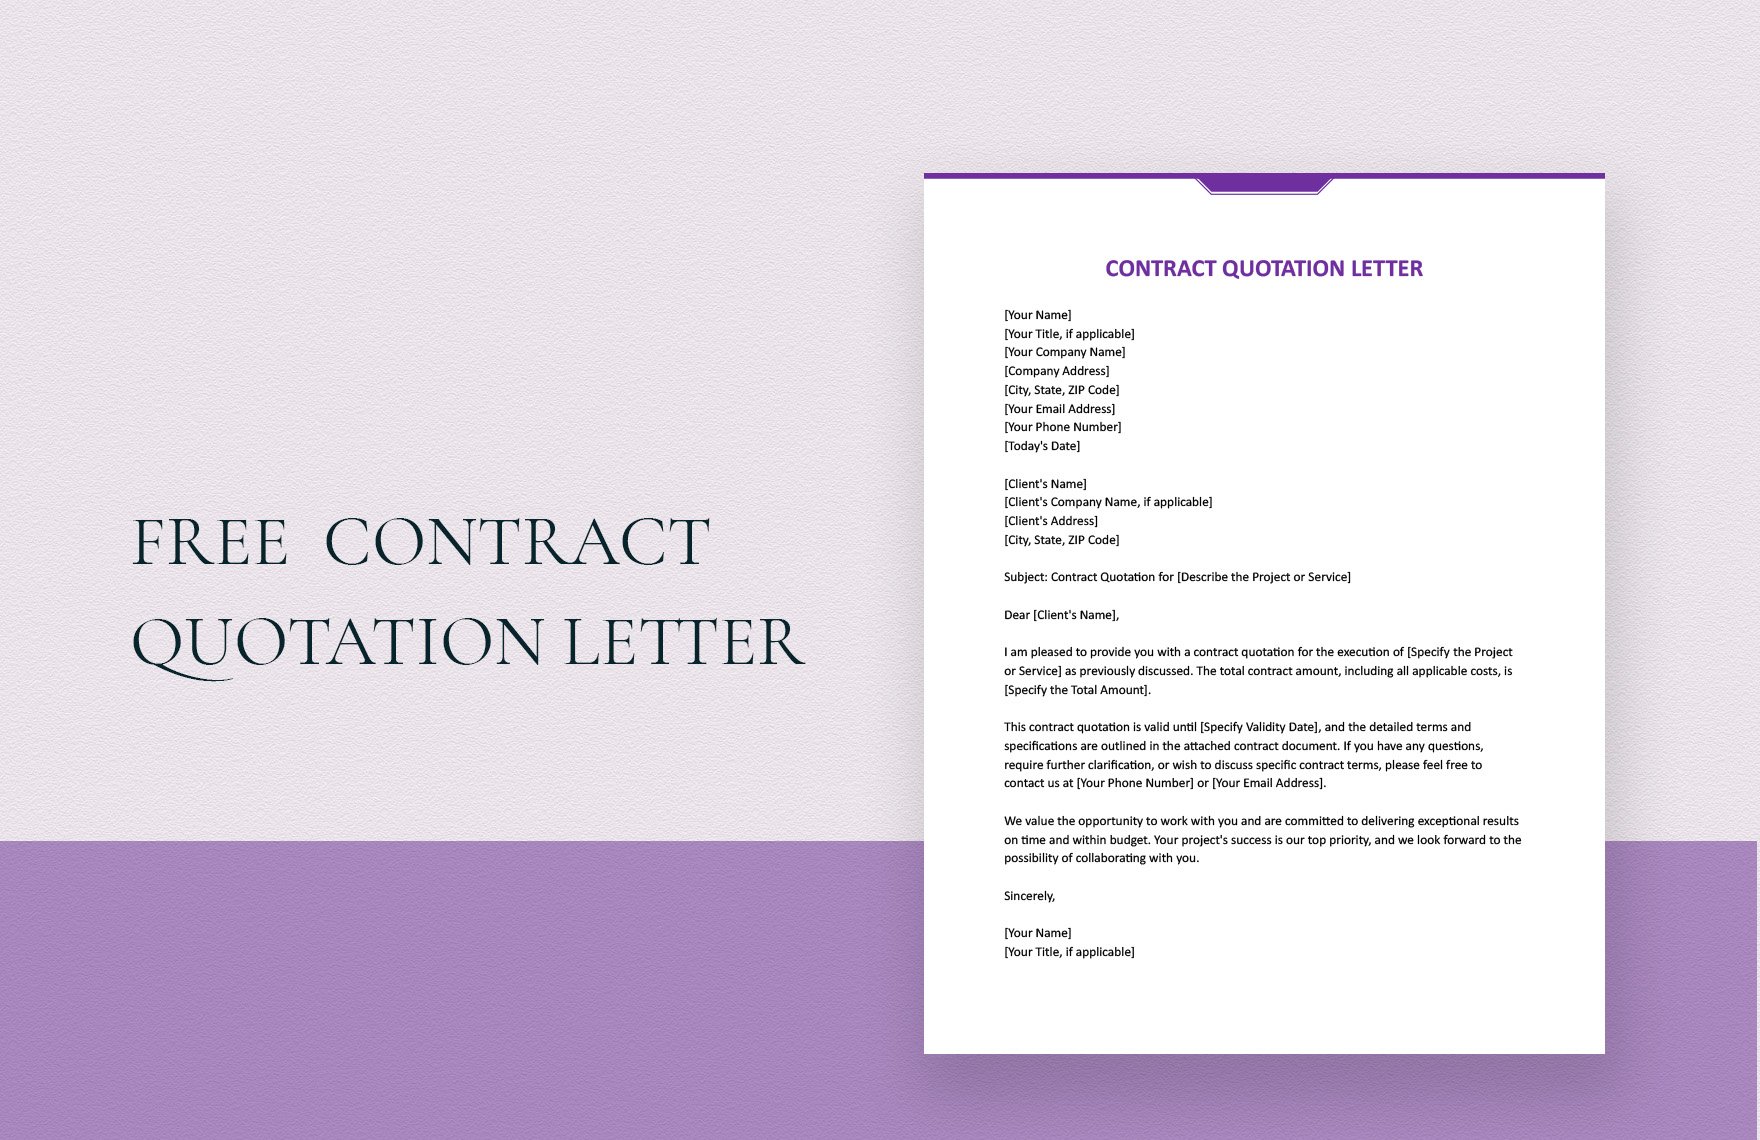 Contract Quotation Letter